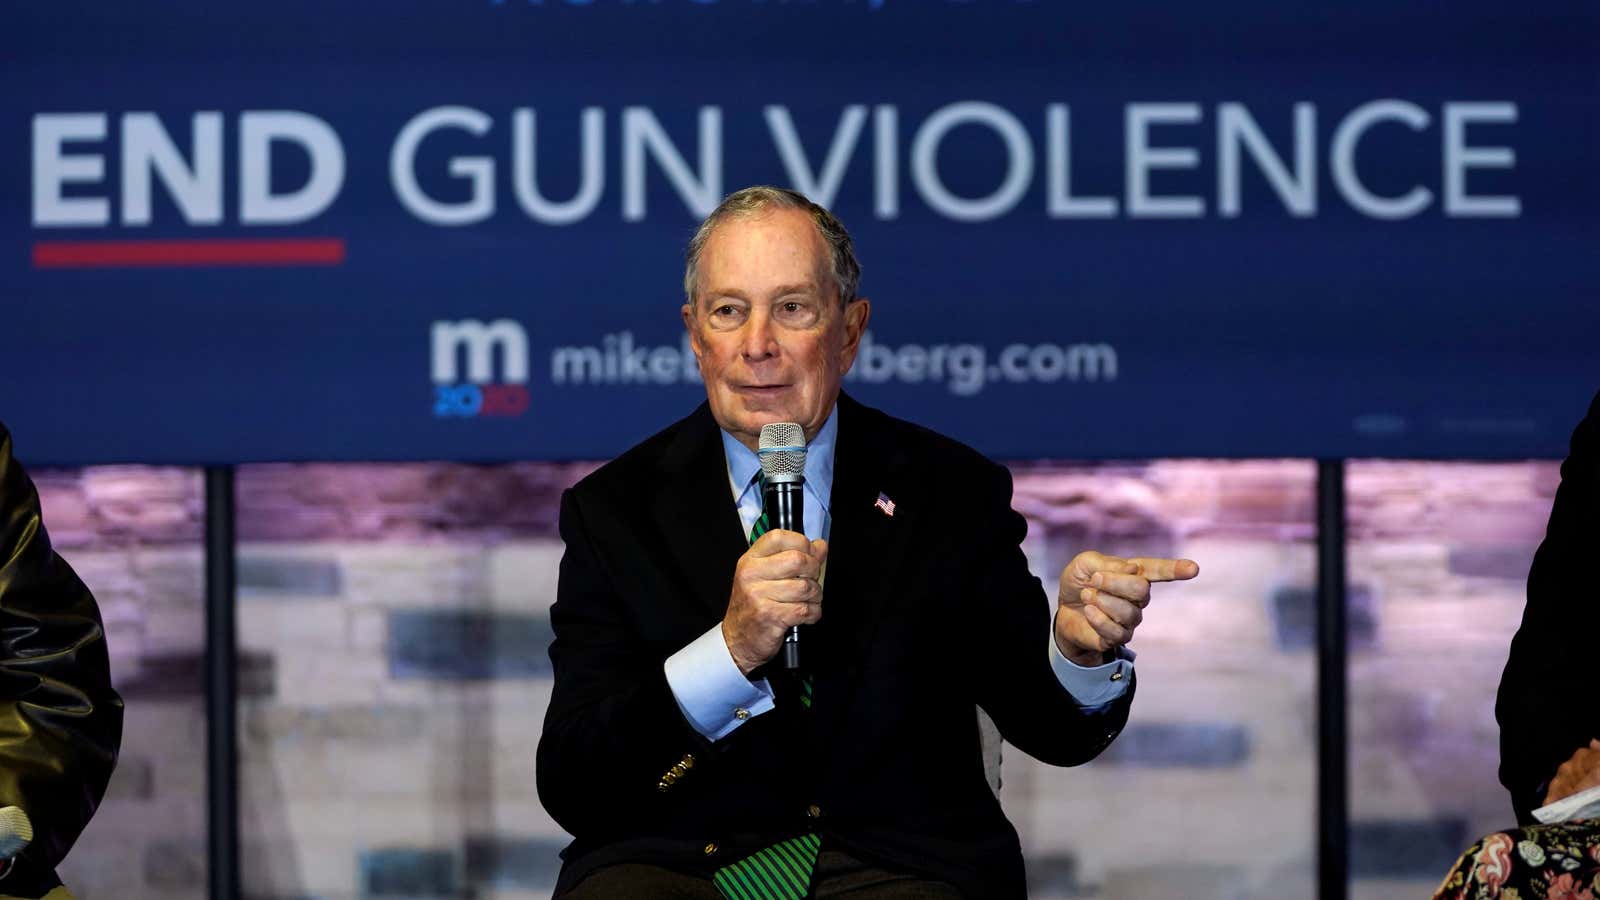 Bloomberg’s Facebook ads focus on guns, climate change, and beating Trump.